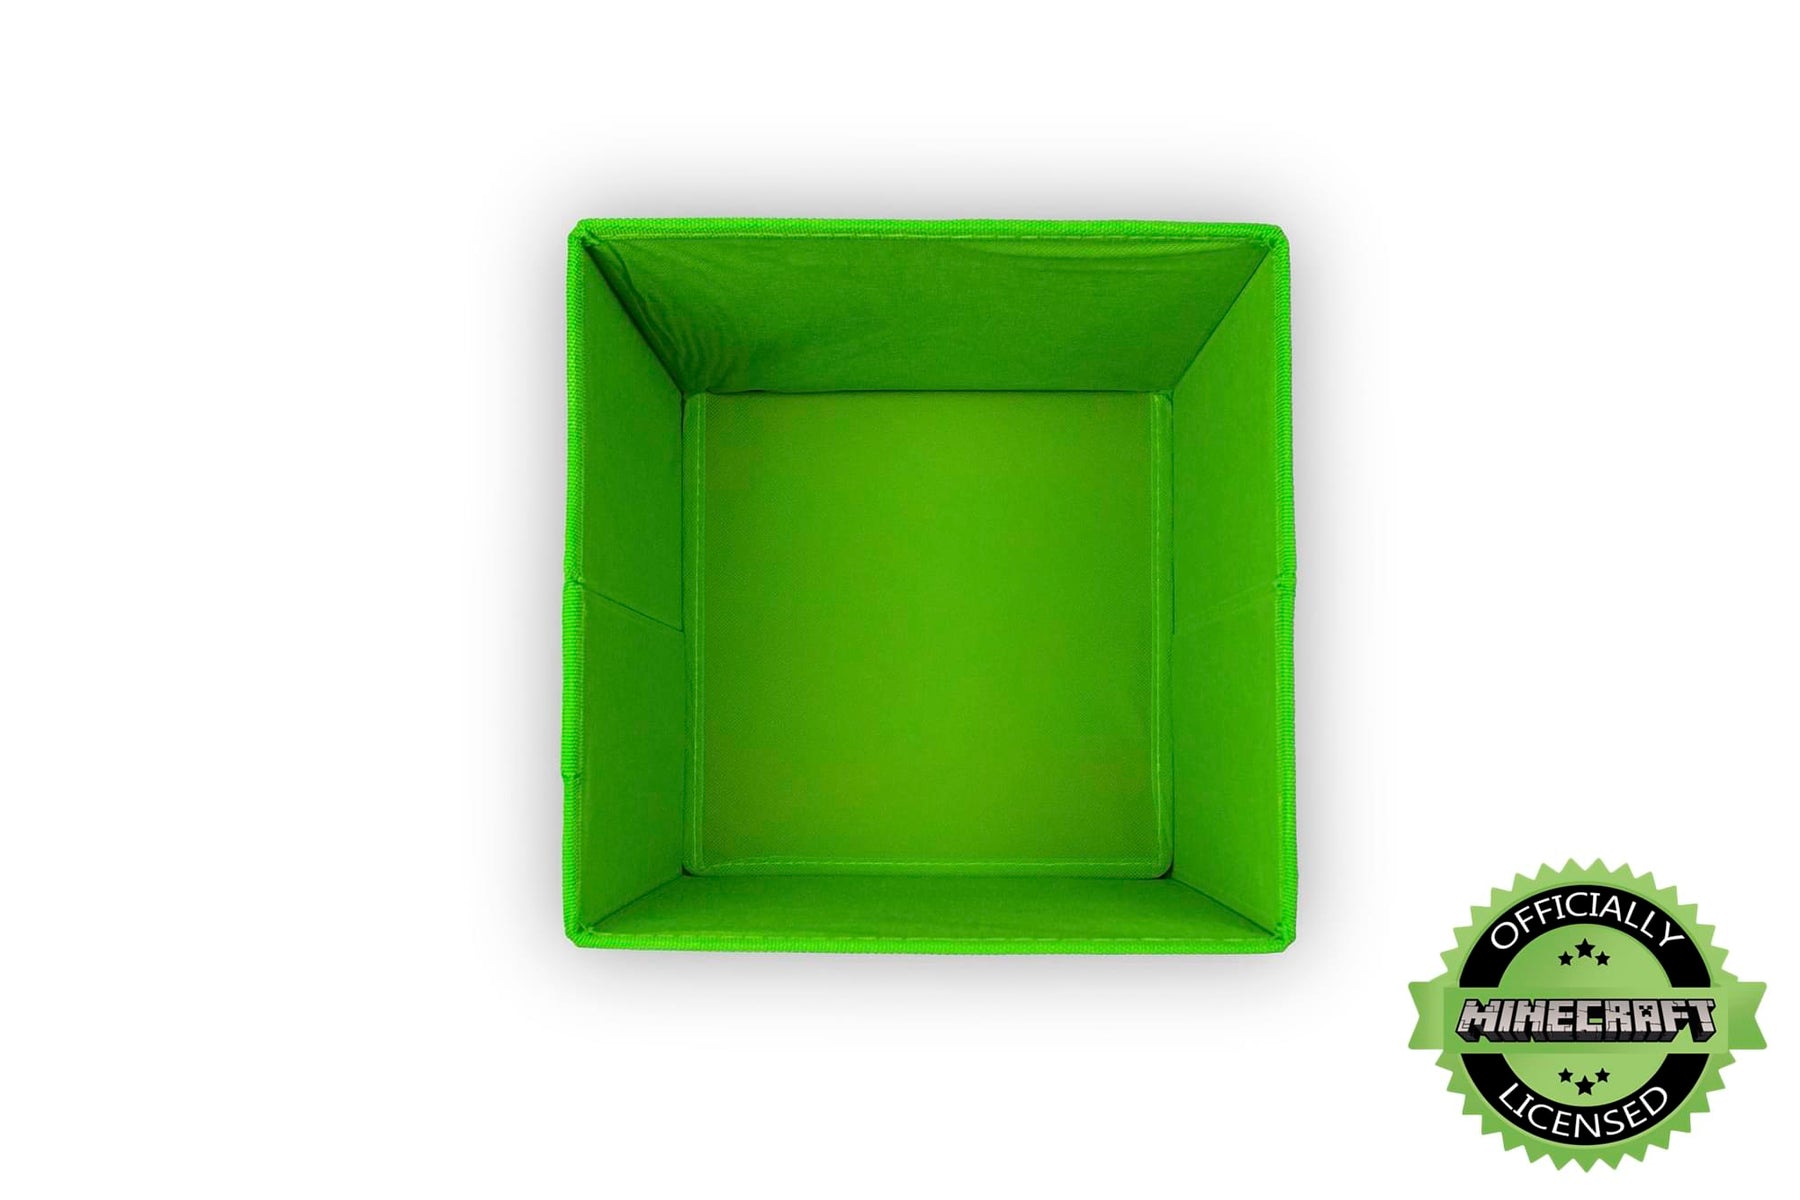 How to Make a real life exploding Minecraft creeper « Origami